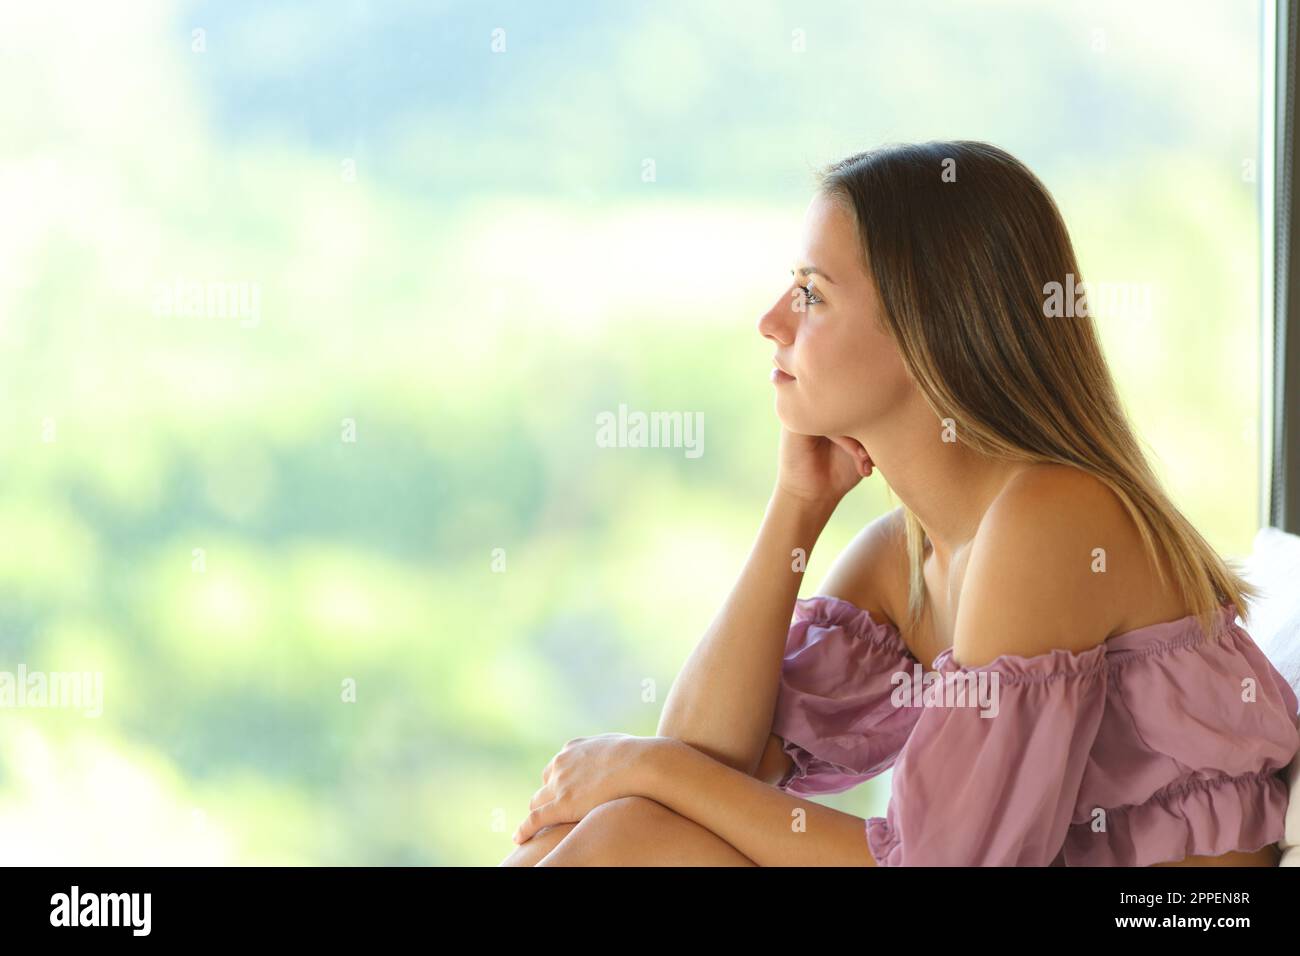 Pensive teen looking through a window inside a rural house Stock Photo